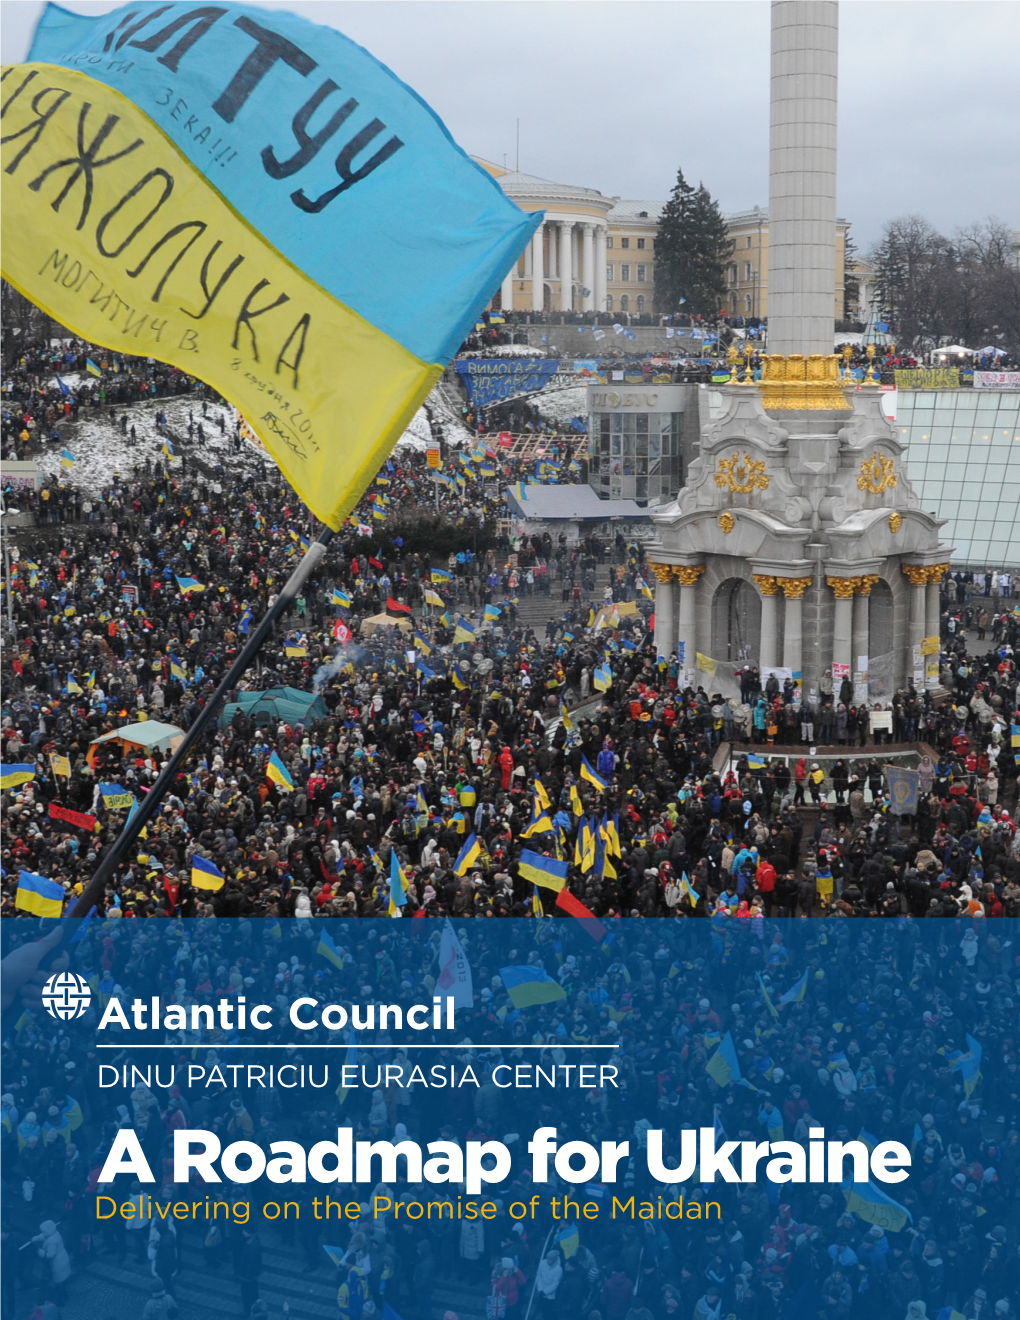 A Roadmap for Ukraine: Delivering on the Promise of the Maidan